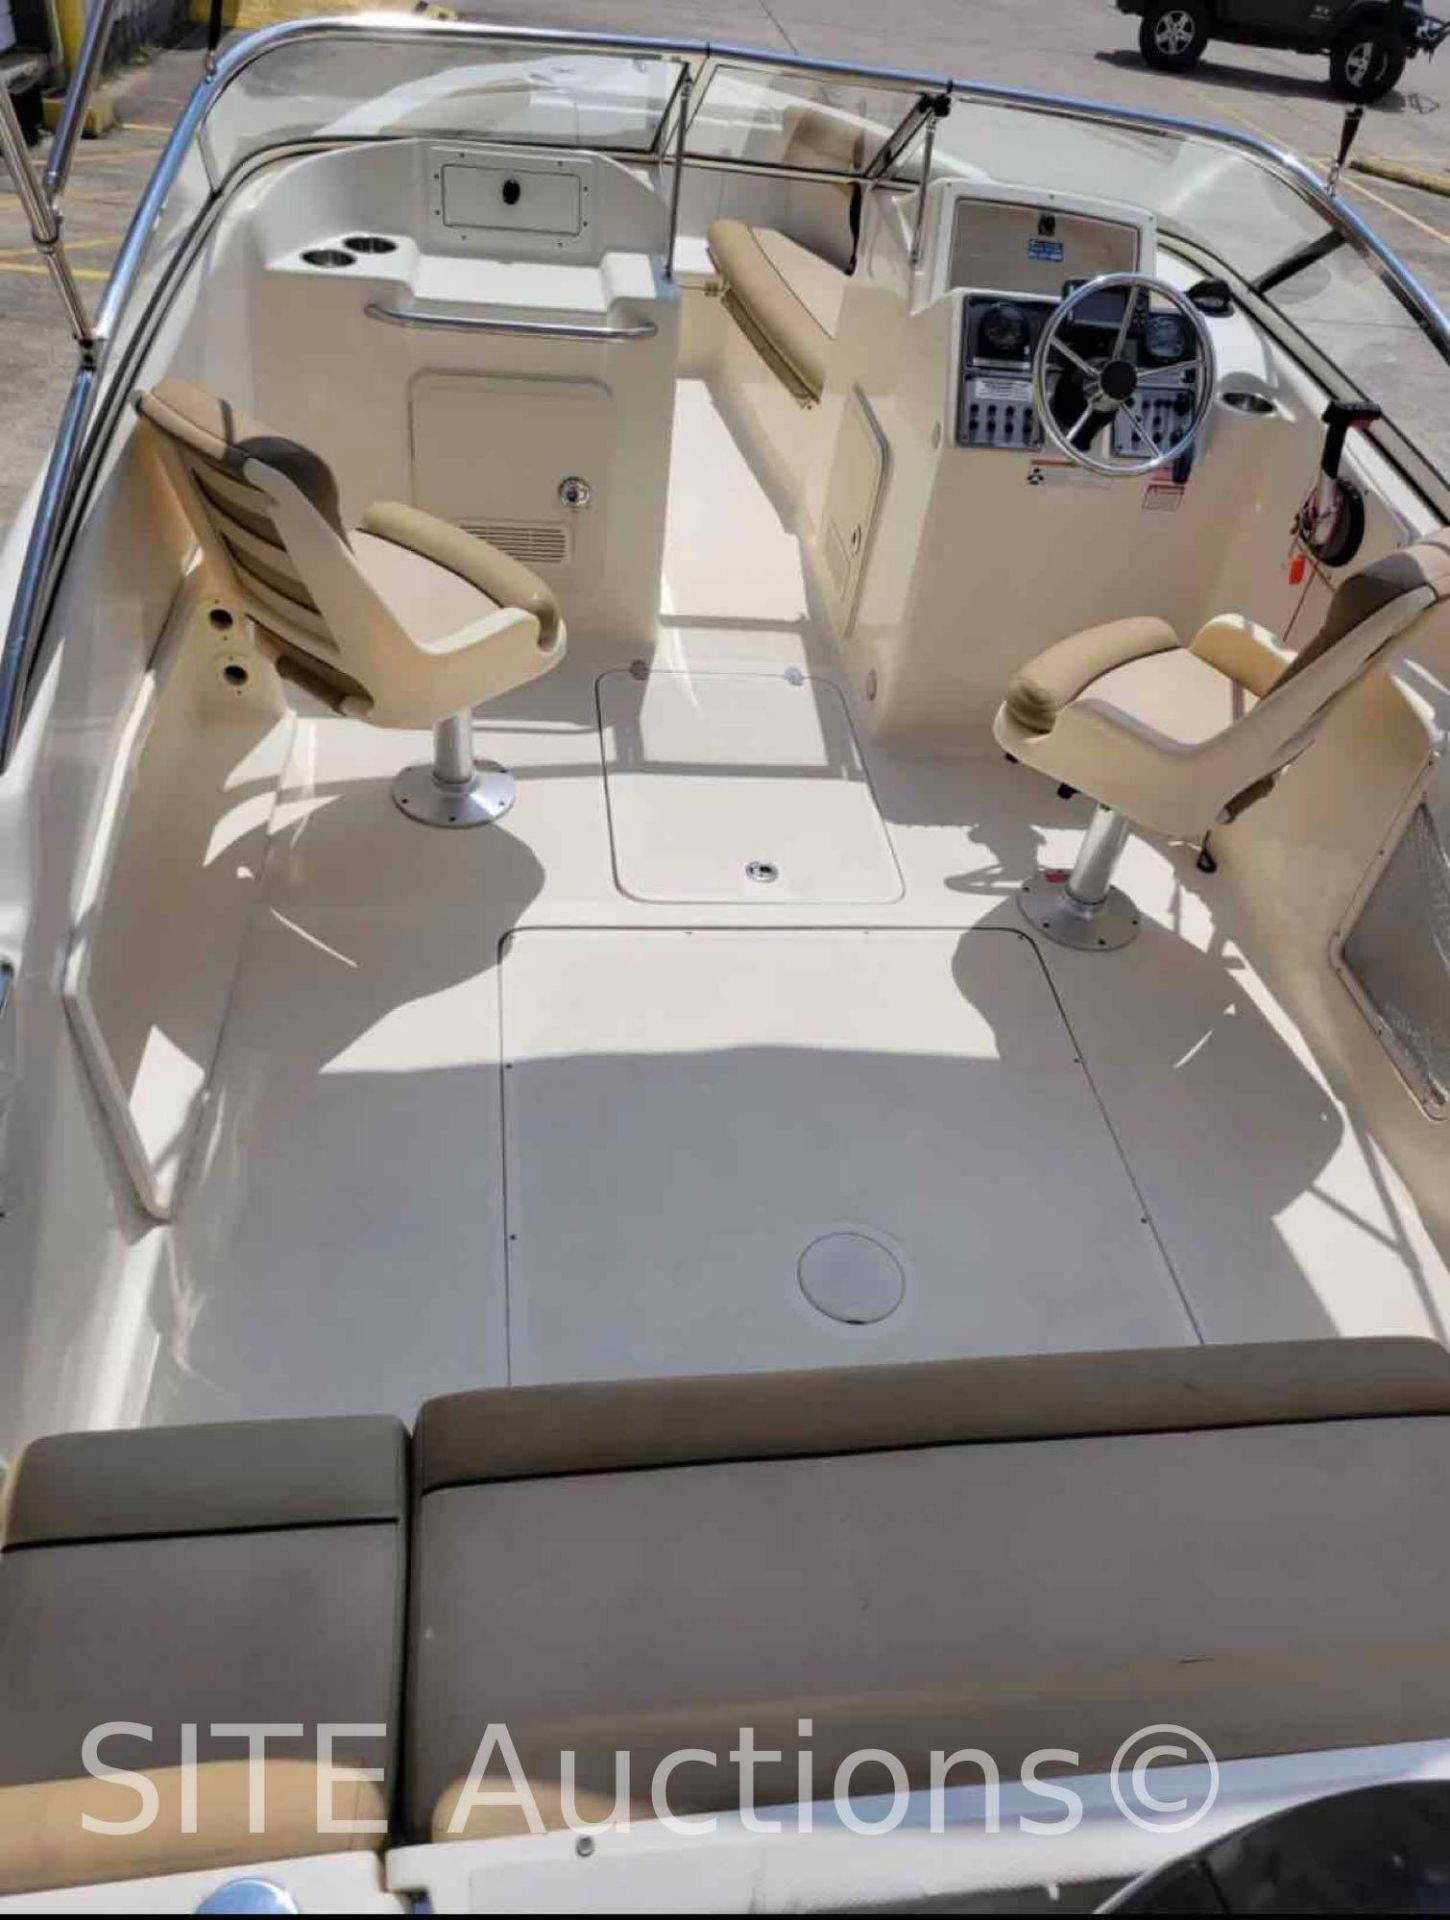 2020 Scout Dorado 20ft. Boat with Trailer - Image 5 of 21